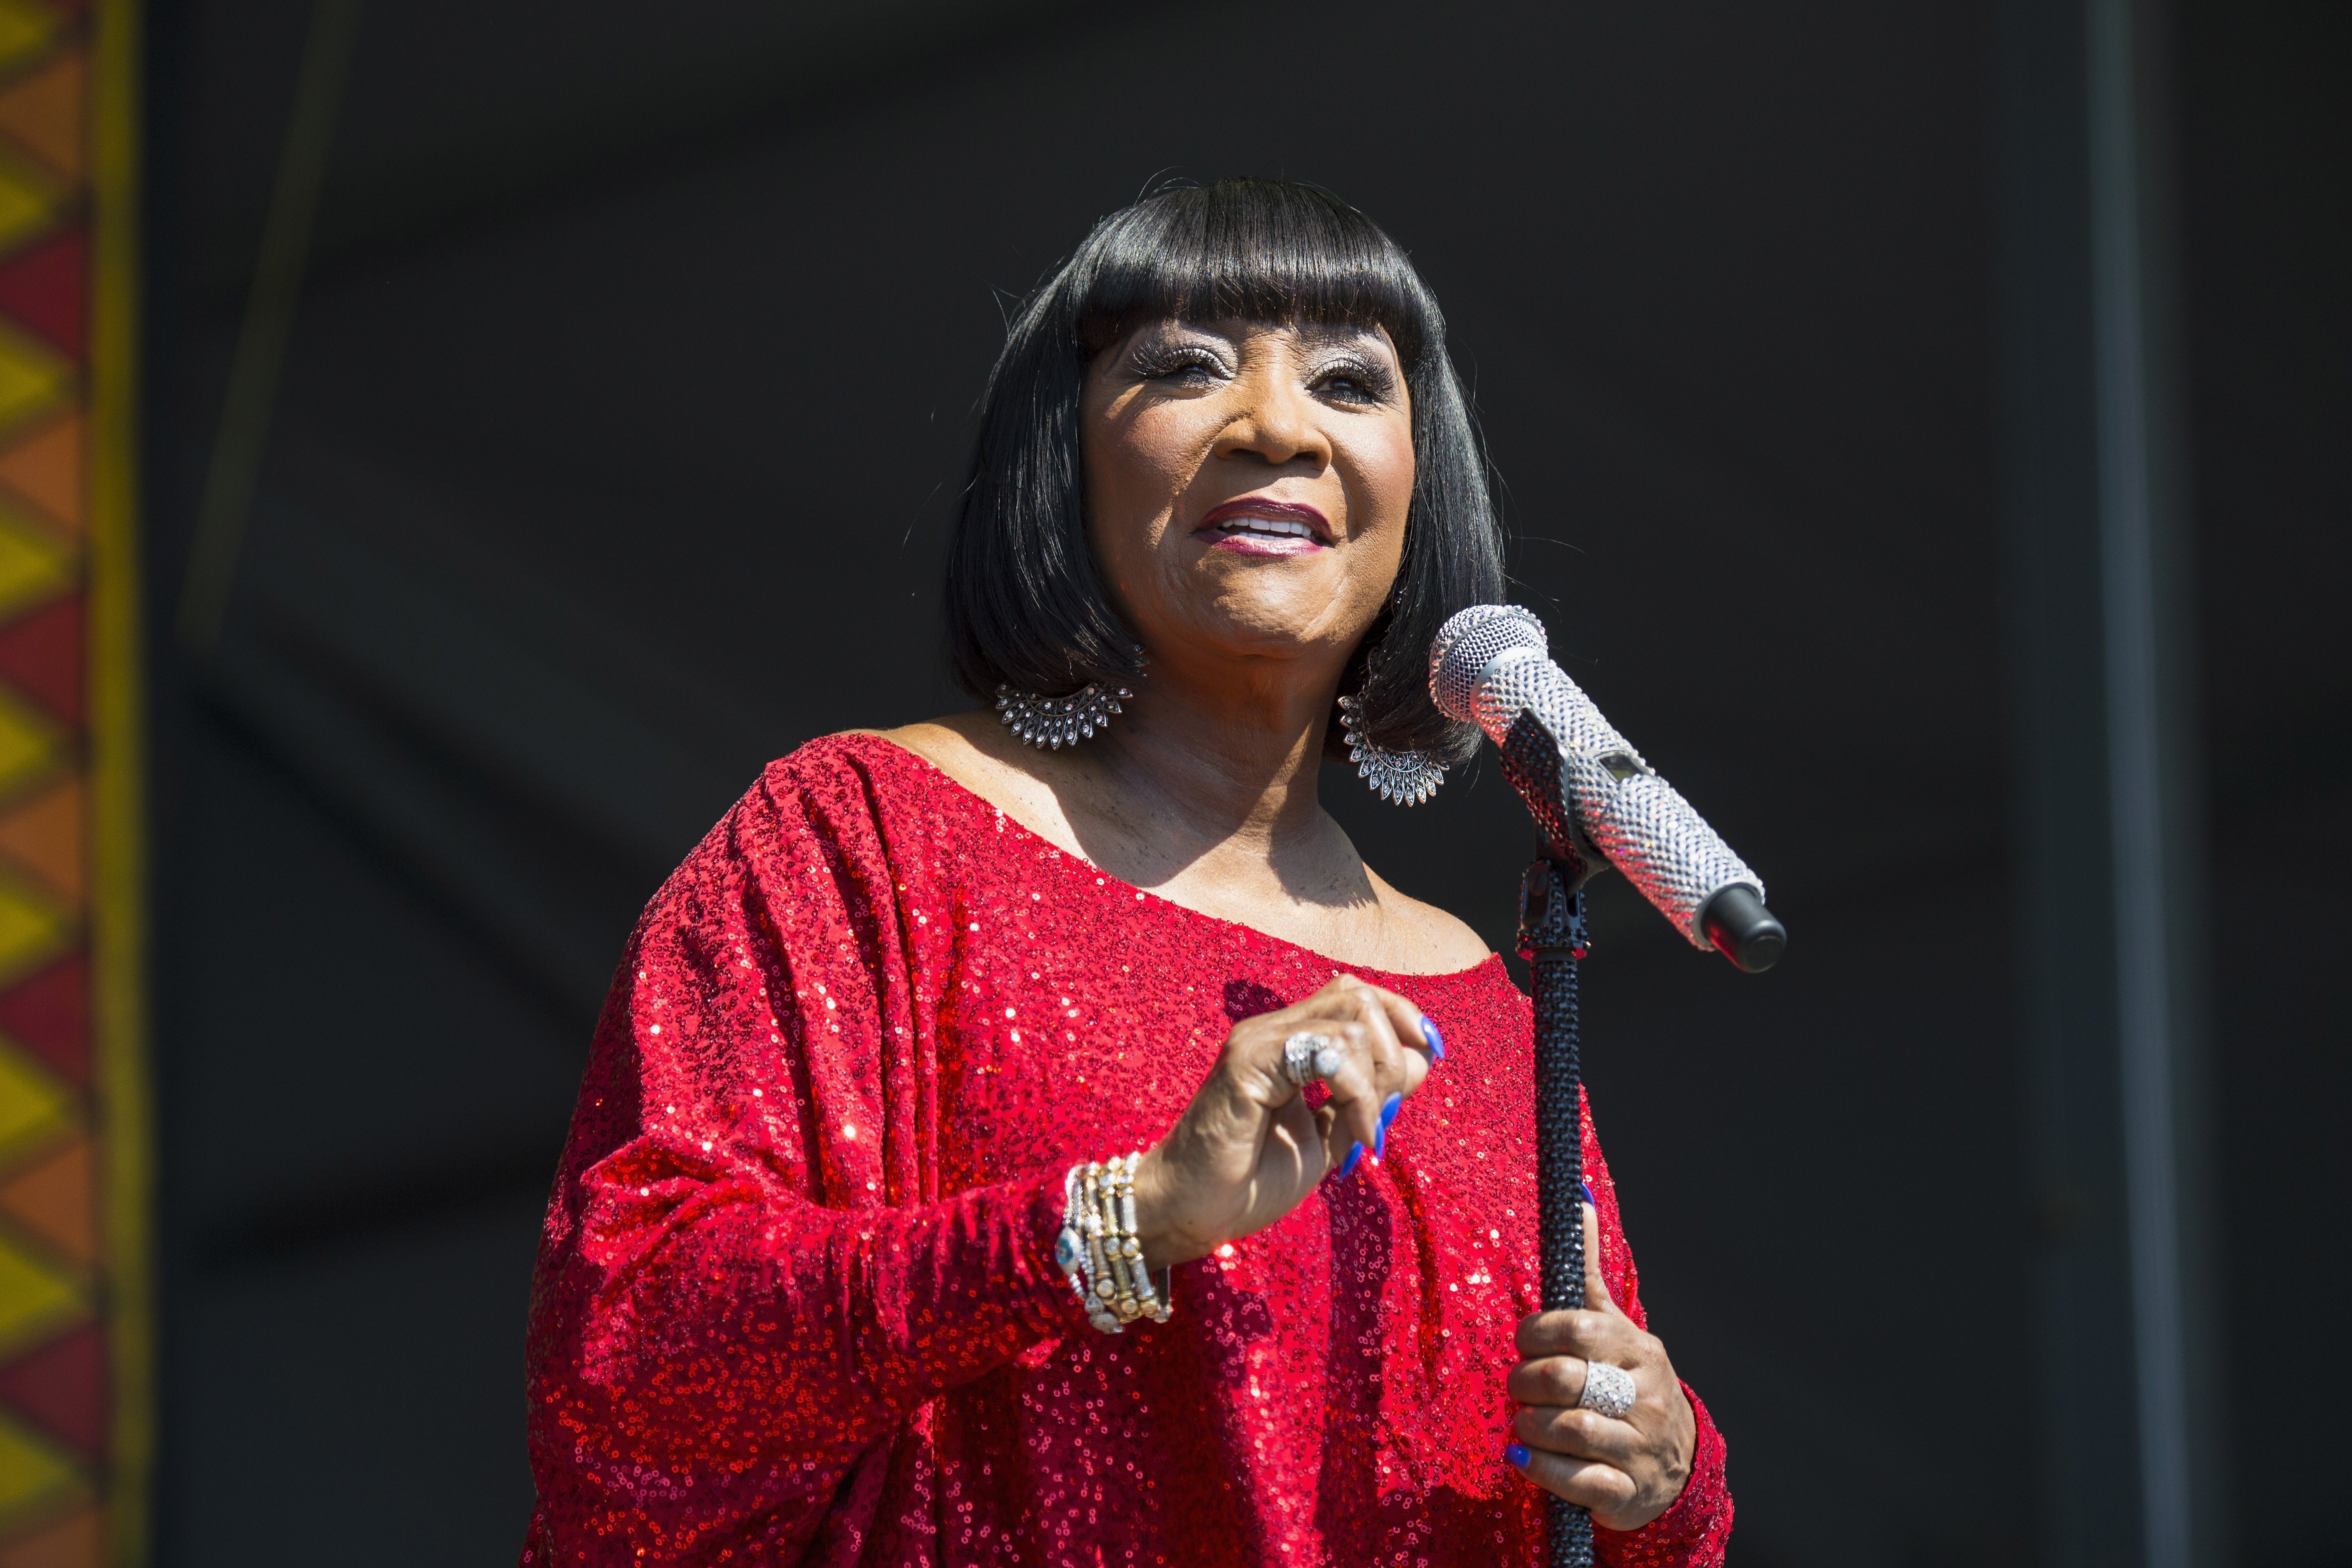 Patti LaBelle performs during the 2017 New Orleans Jazz & Heritage Festival at Fair Grounds Race Course on May 7, 2017 | Photo: Getty Images